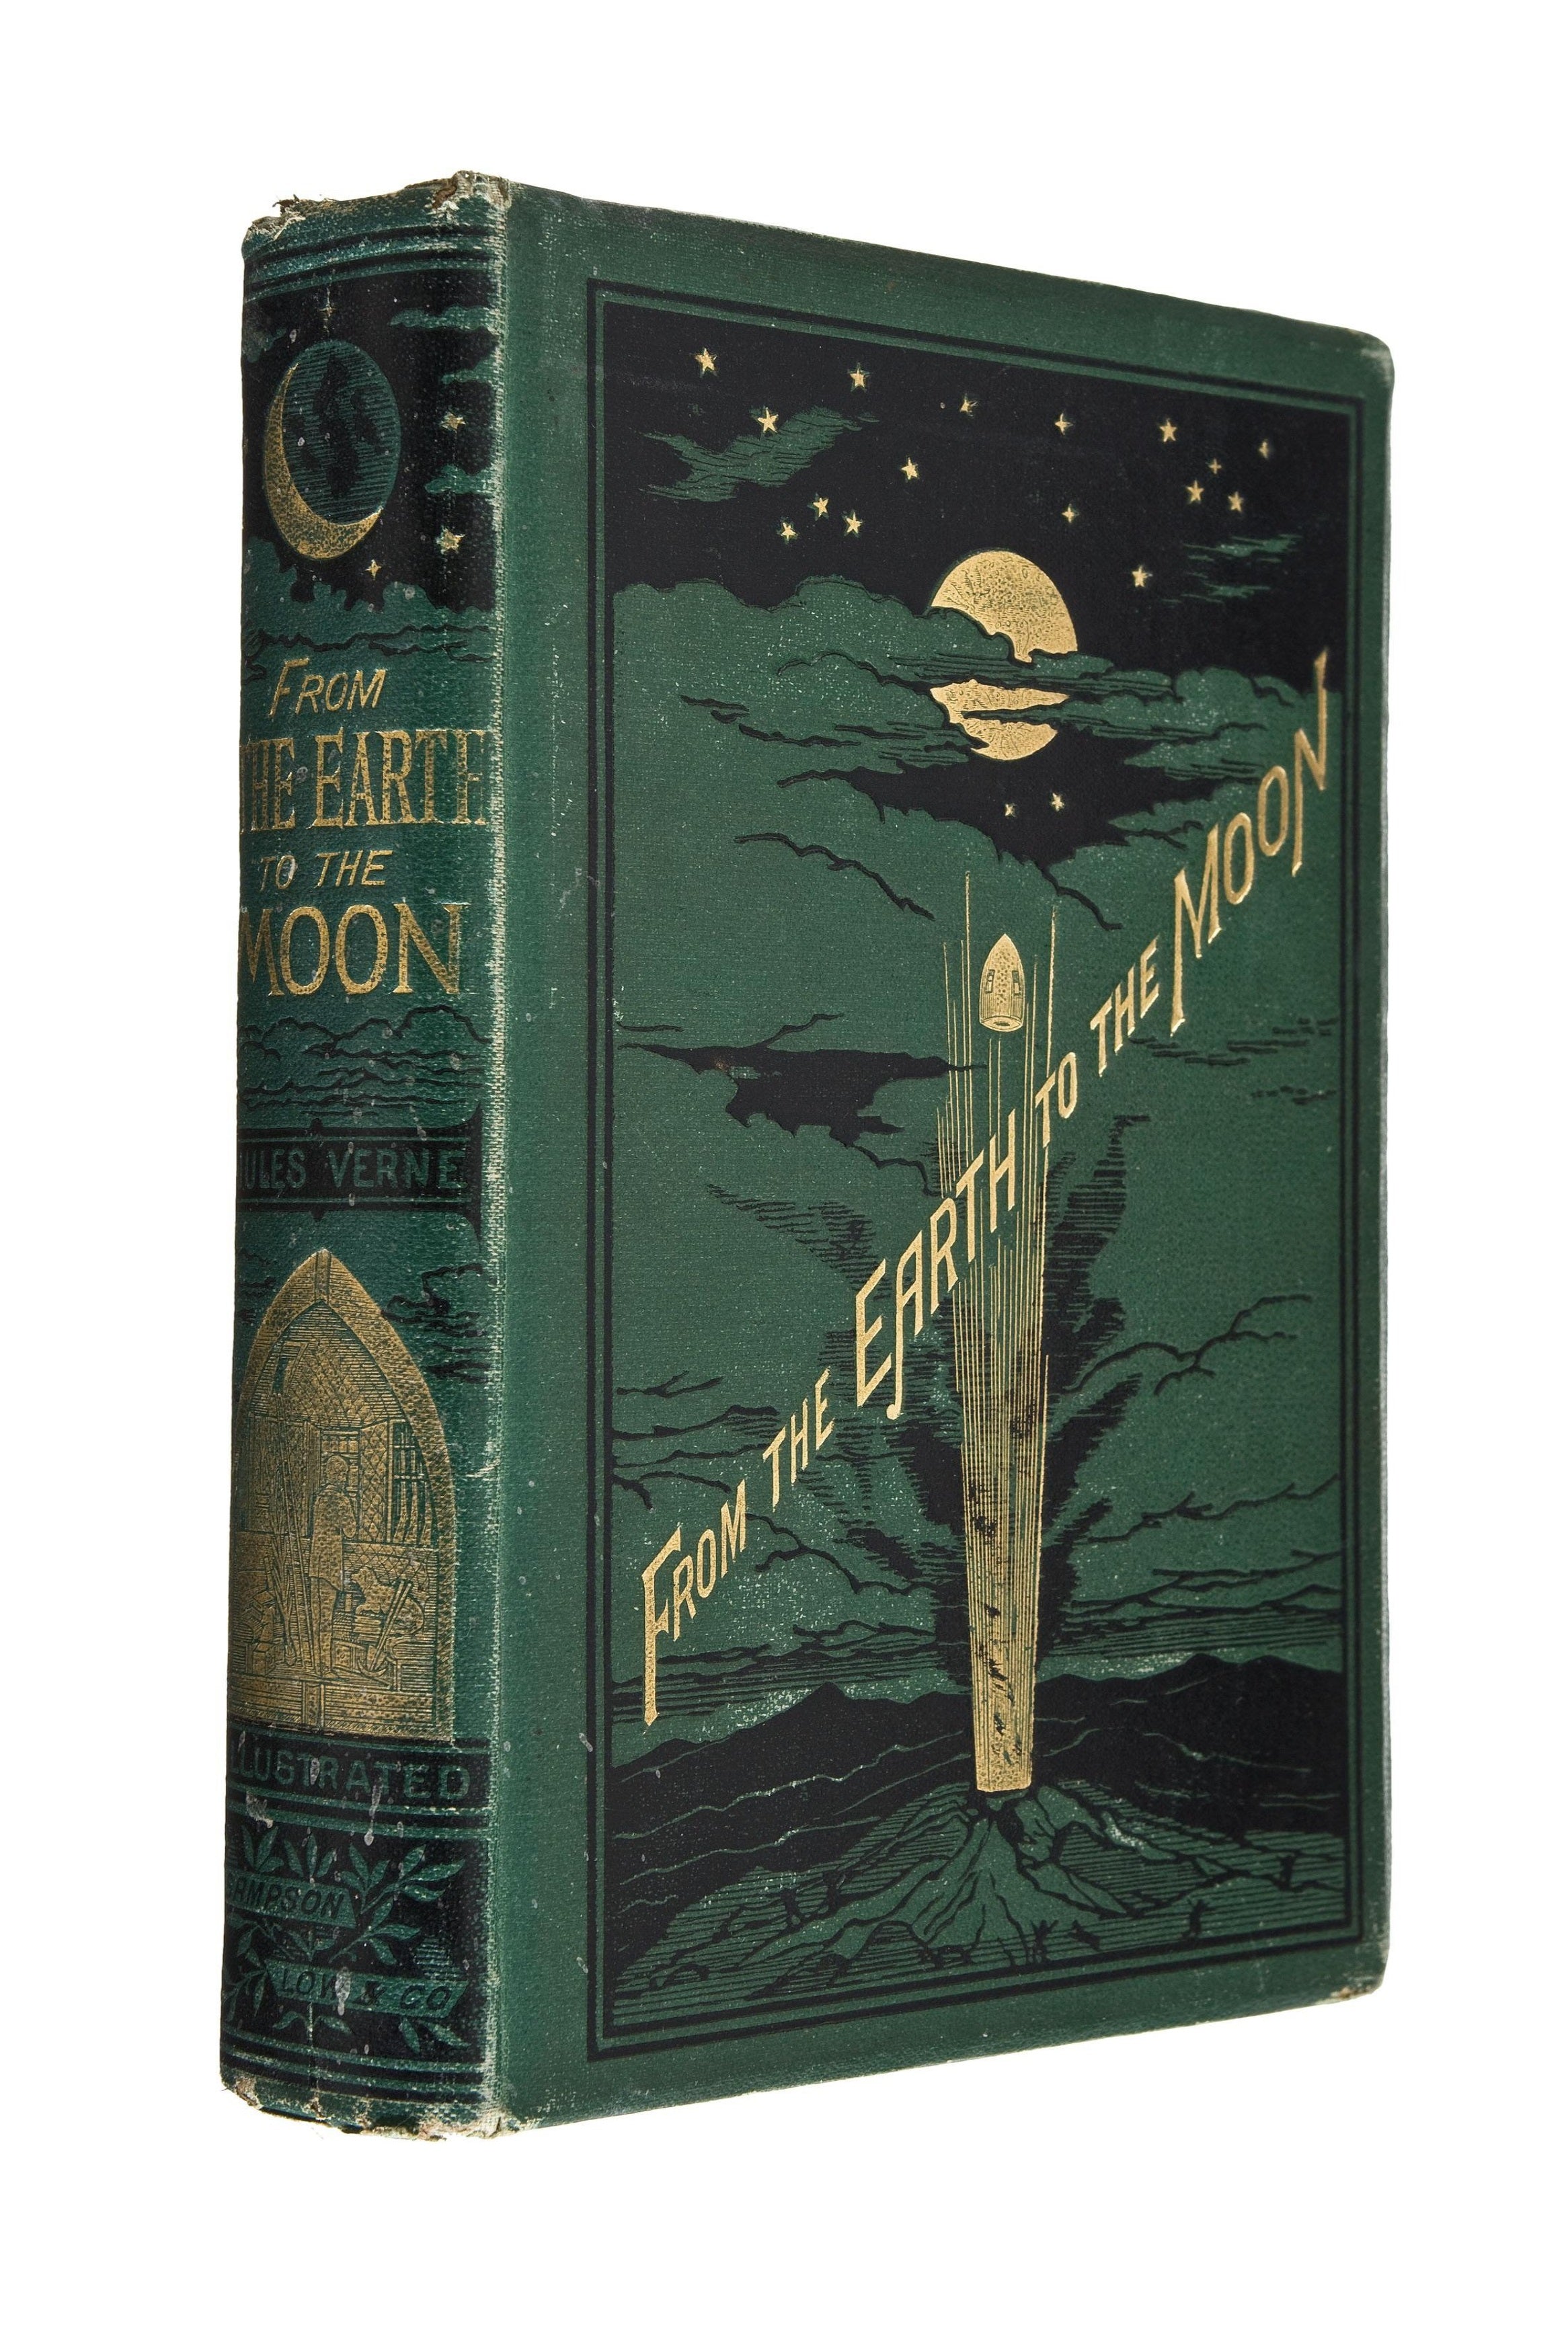 FROM THE EARTH TO THE MOON DIRECT IN 97 HOURS 20 MINUTES BY JULES VERNE 1873 FIRST ENGLISH EDITION